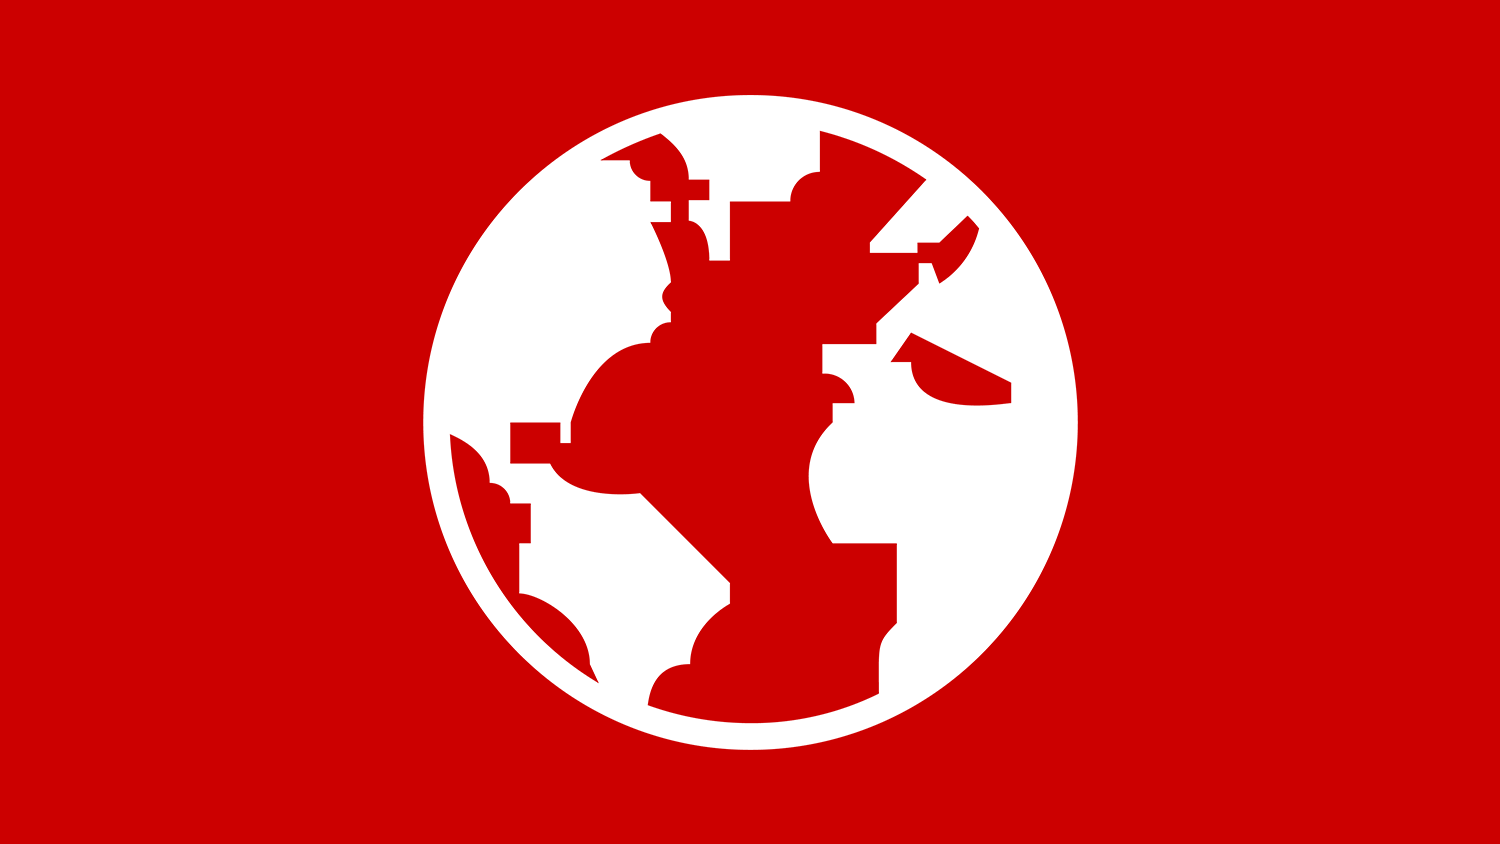 A white icon of a globe on a red background